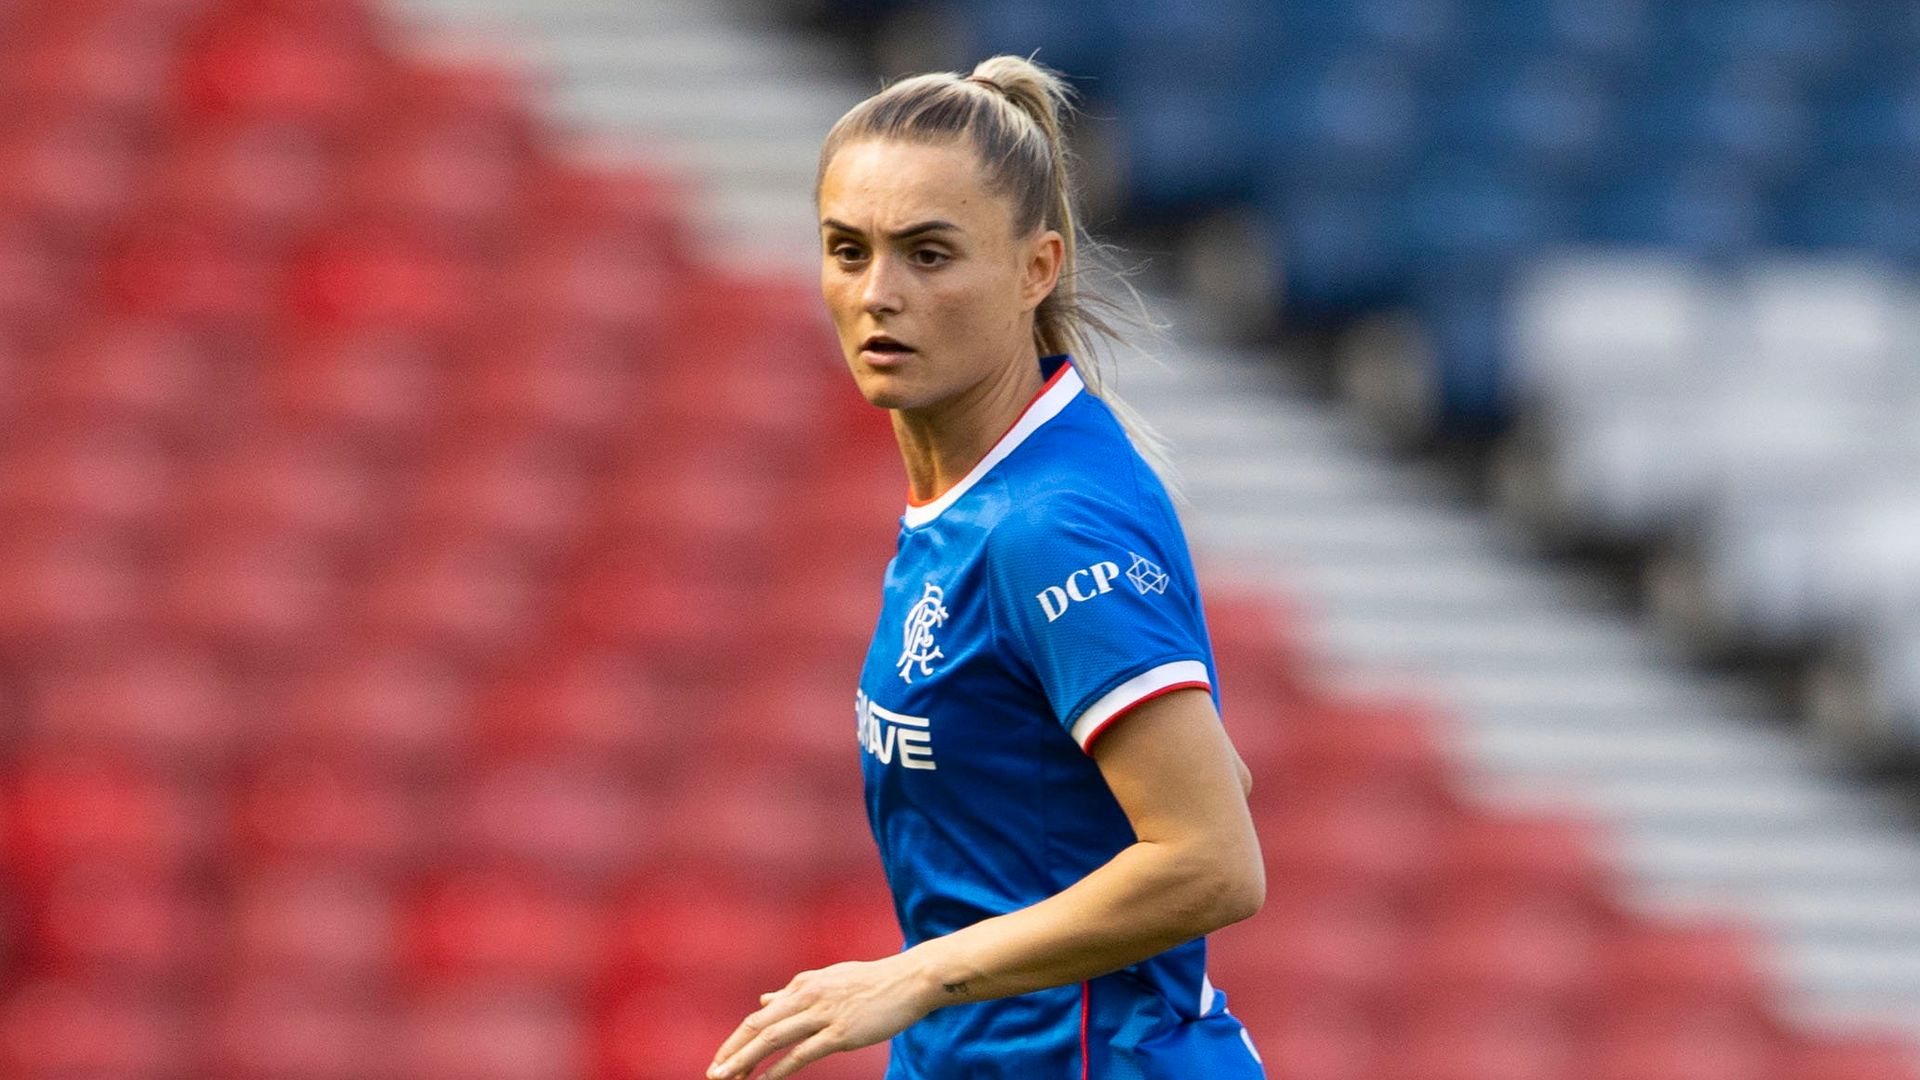 Kerr named SWPL player of month for March